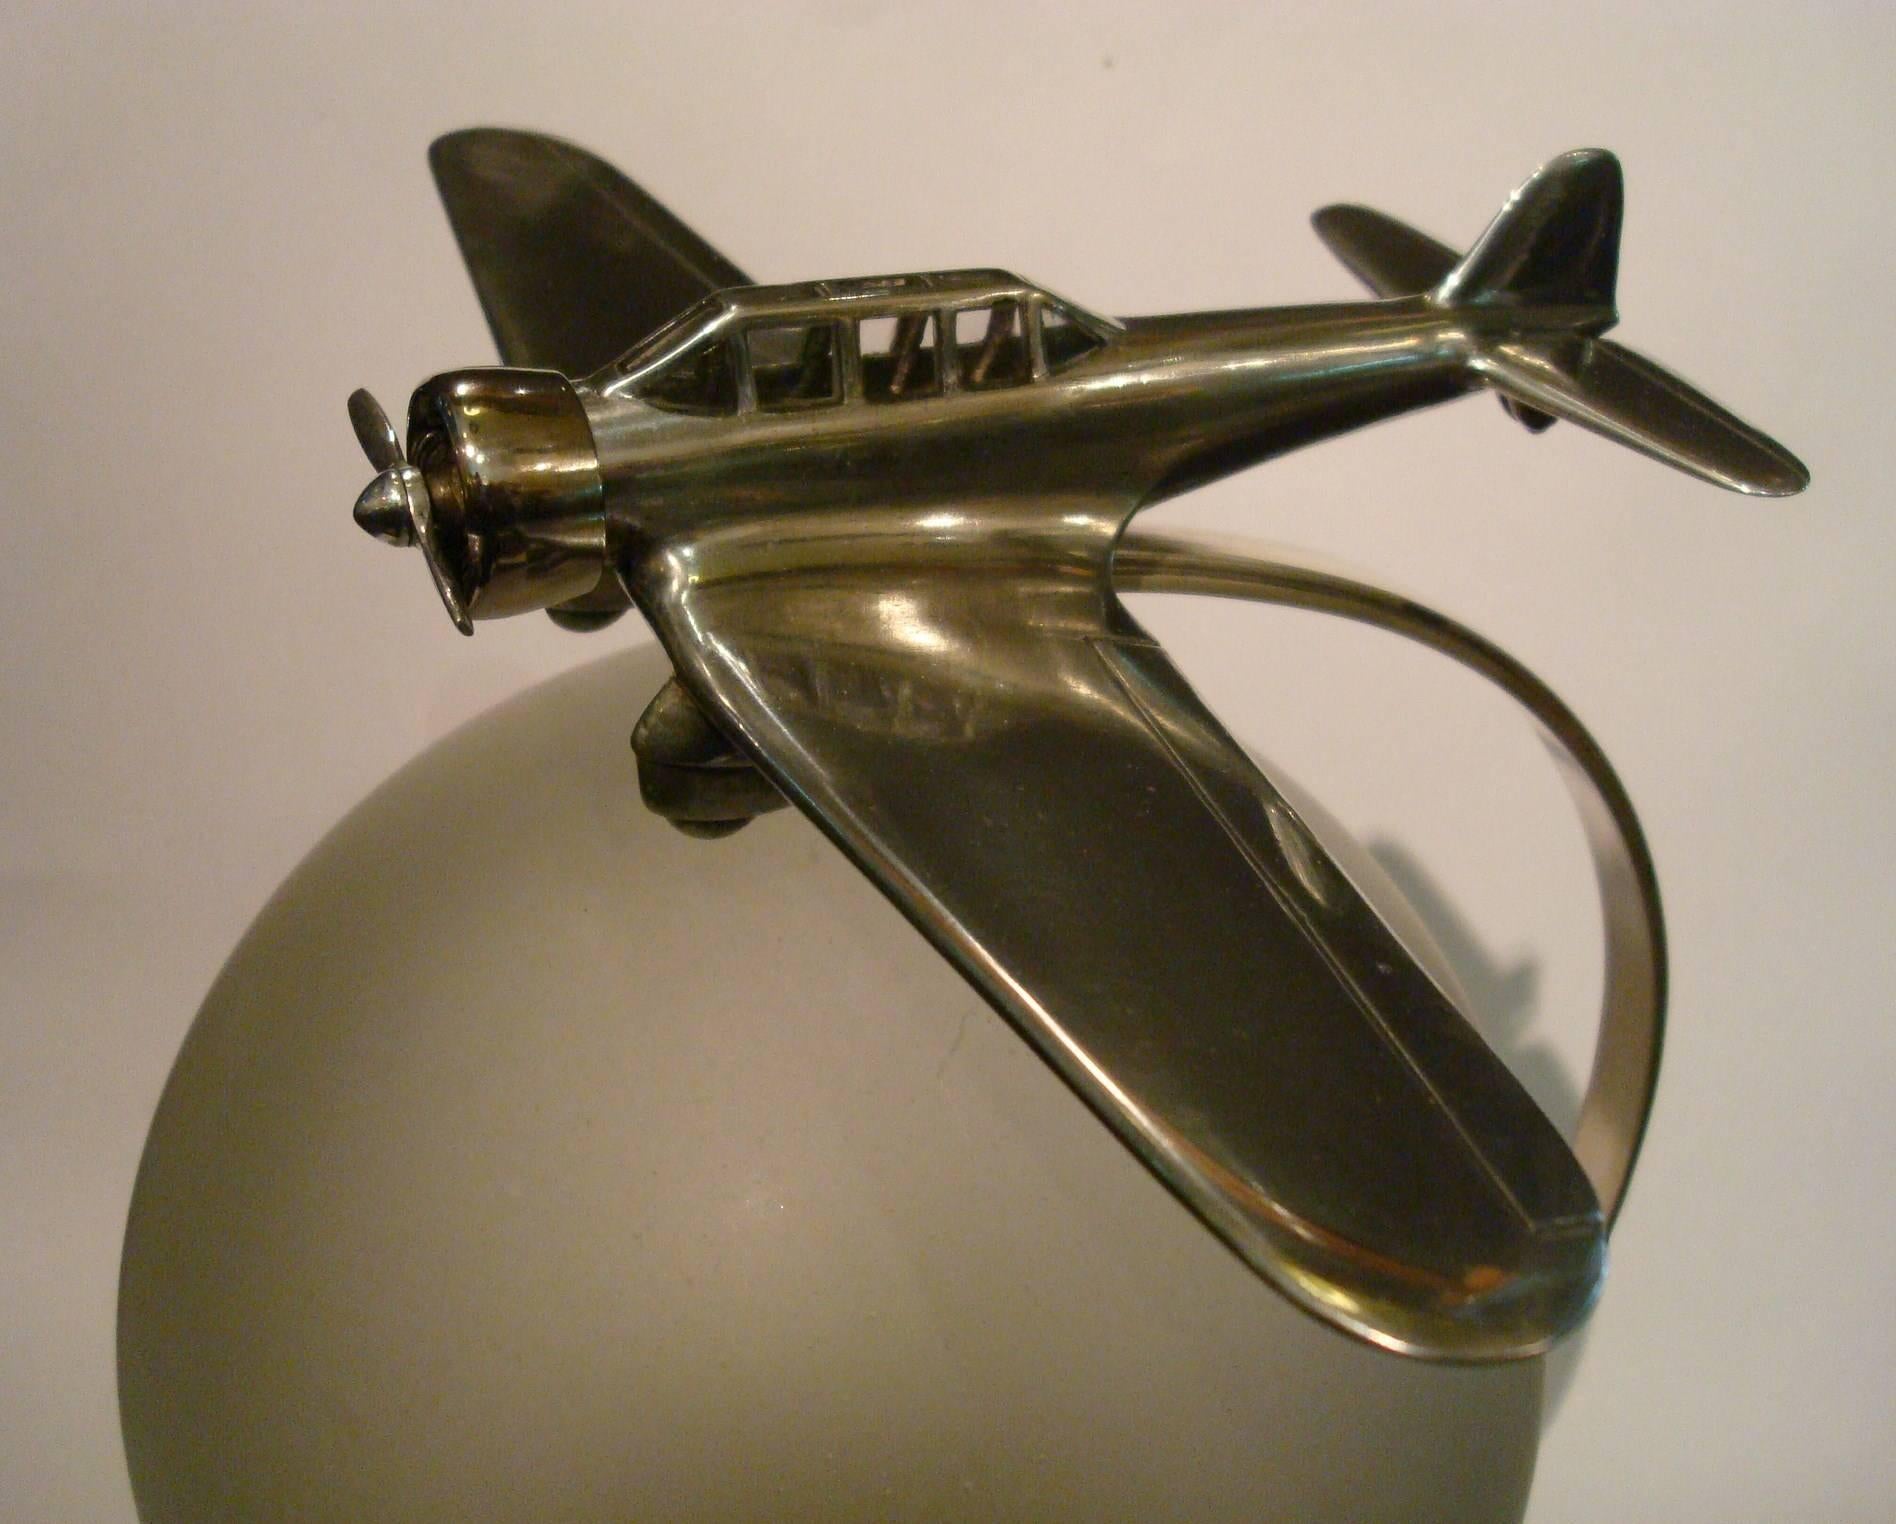 Fantastic airplane U.S.A. fighter table lamp, circa 1942. The lamp was made for a pilot's hotel in Buenos Aires- Argentina. Lovely aviation model.